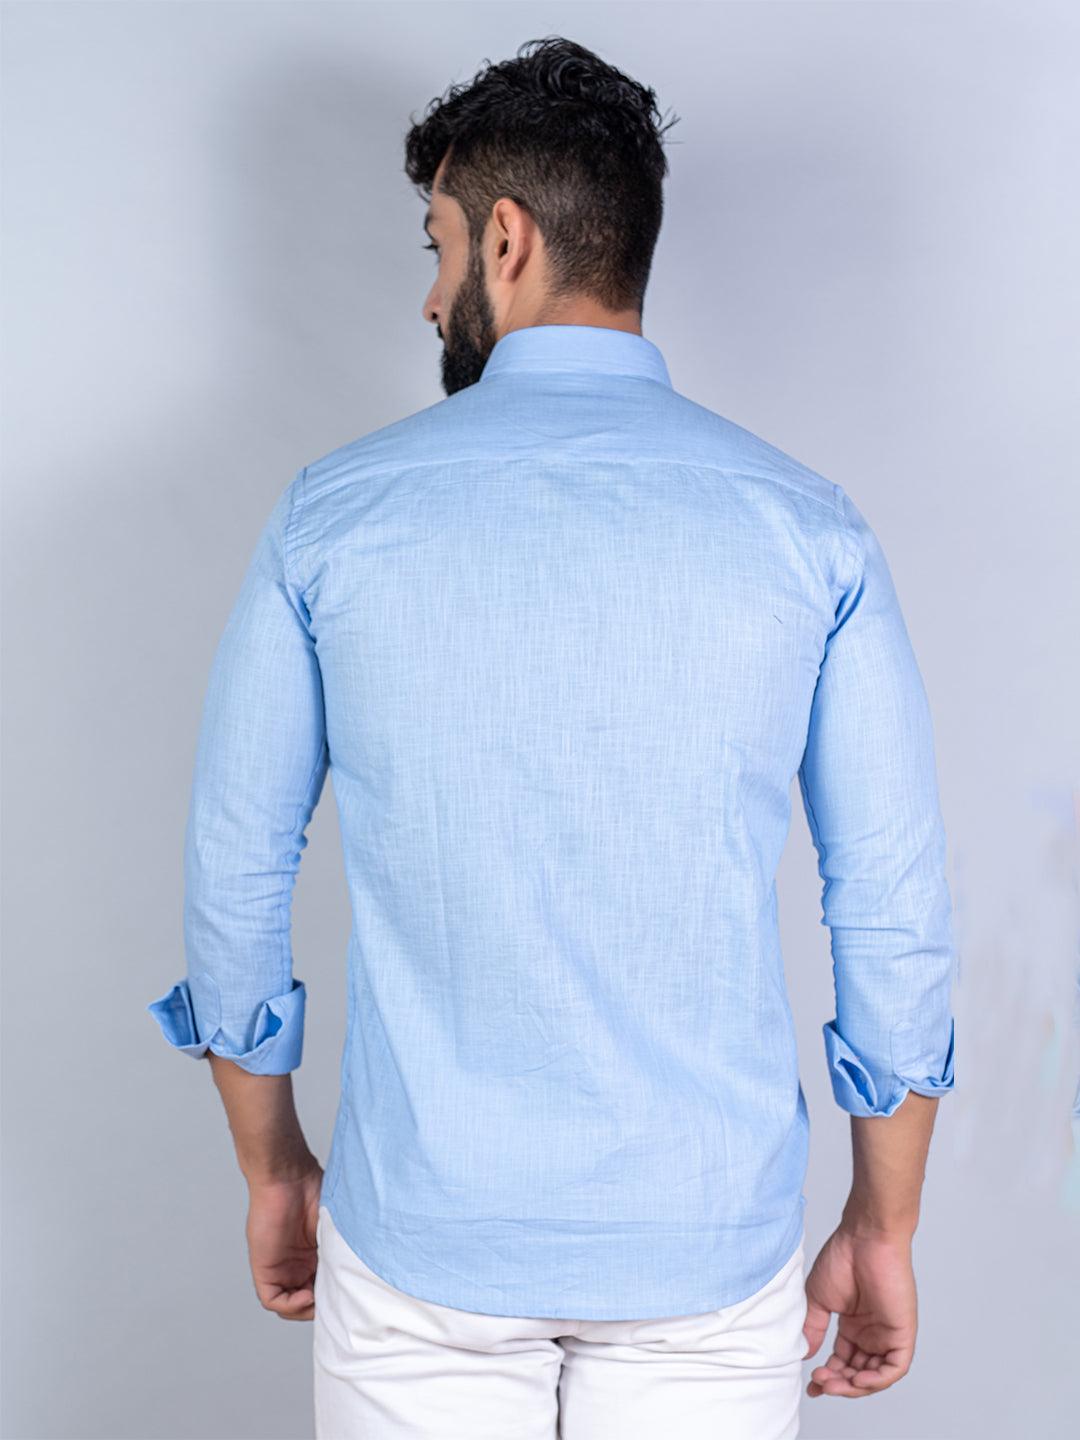 Buy Latest mens denim shirts long sleeve Online In India – Fly69